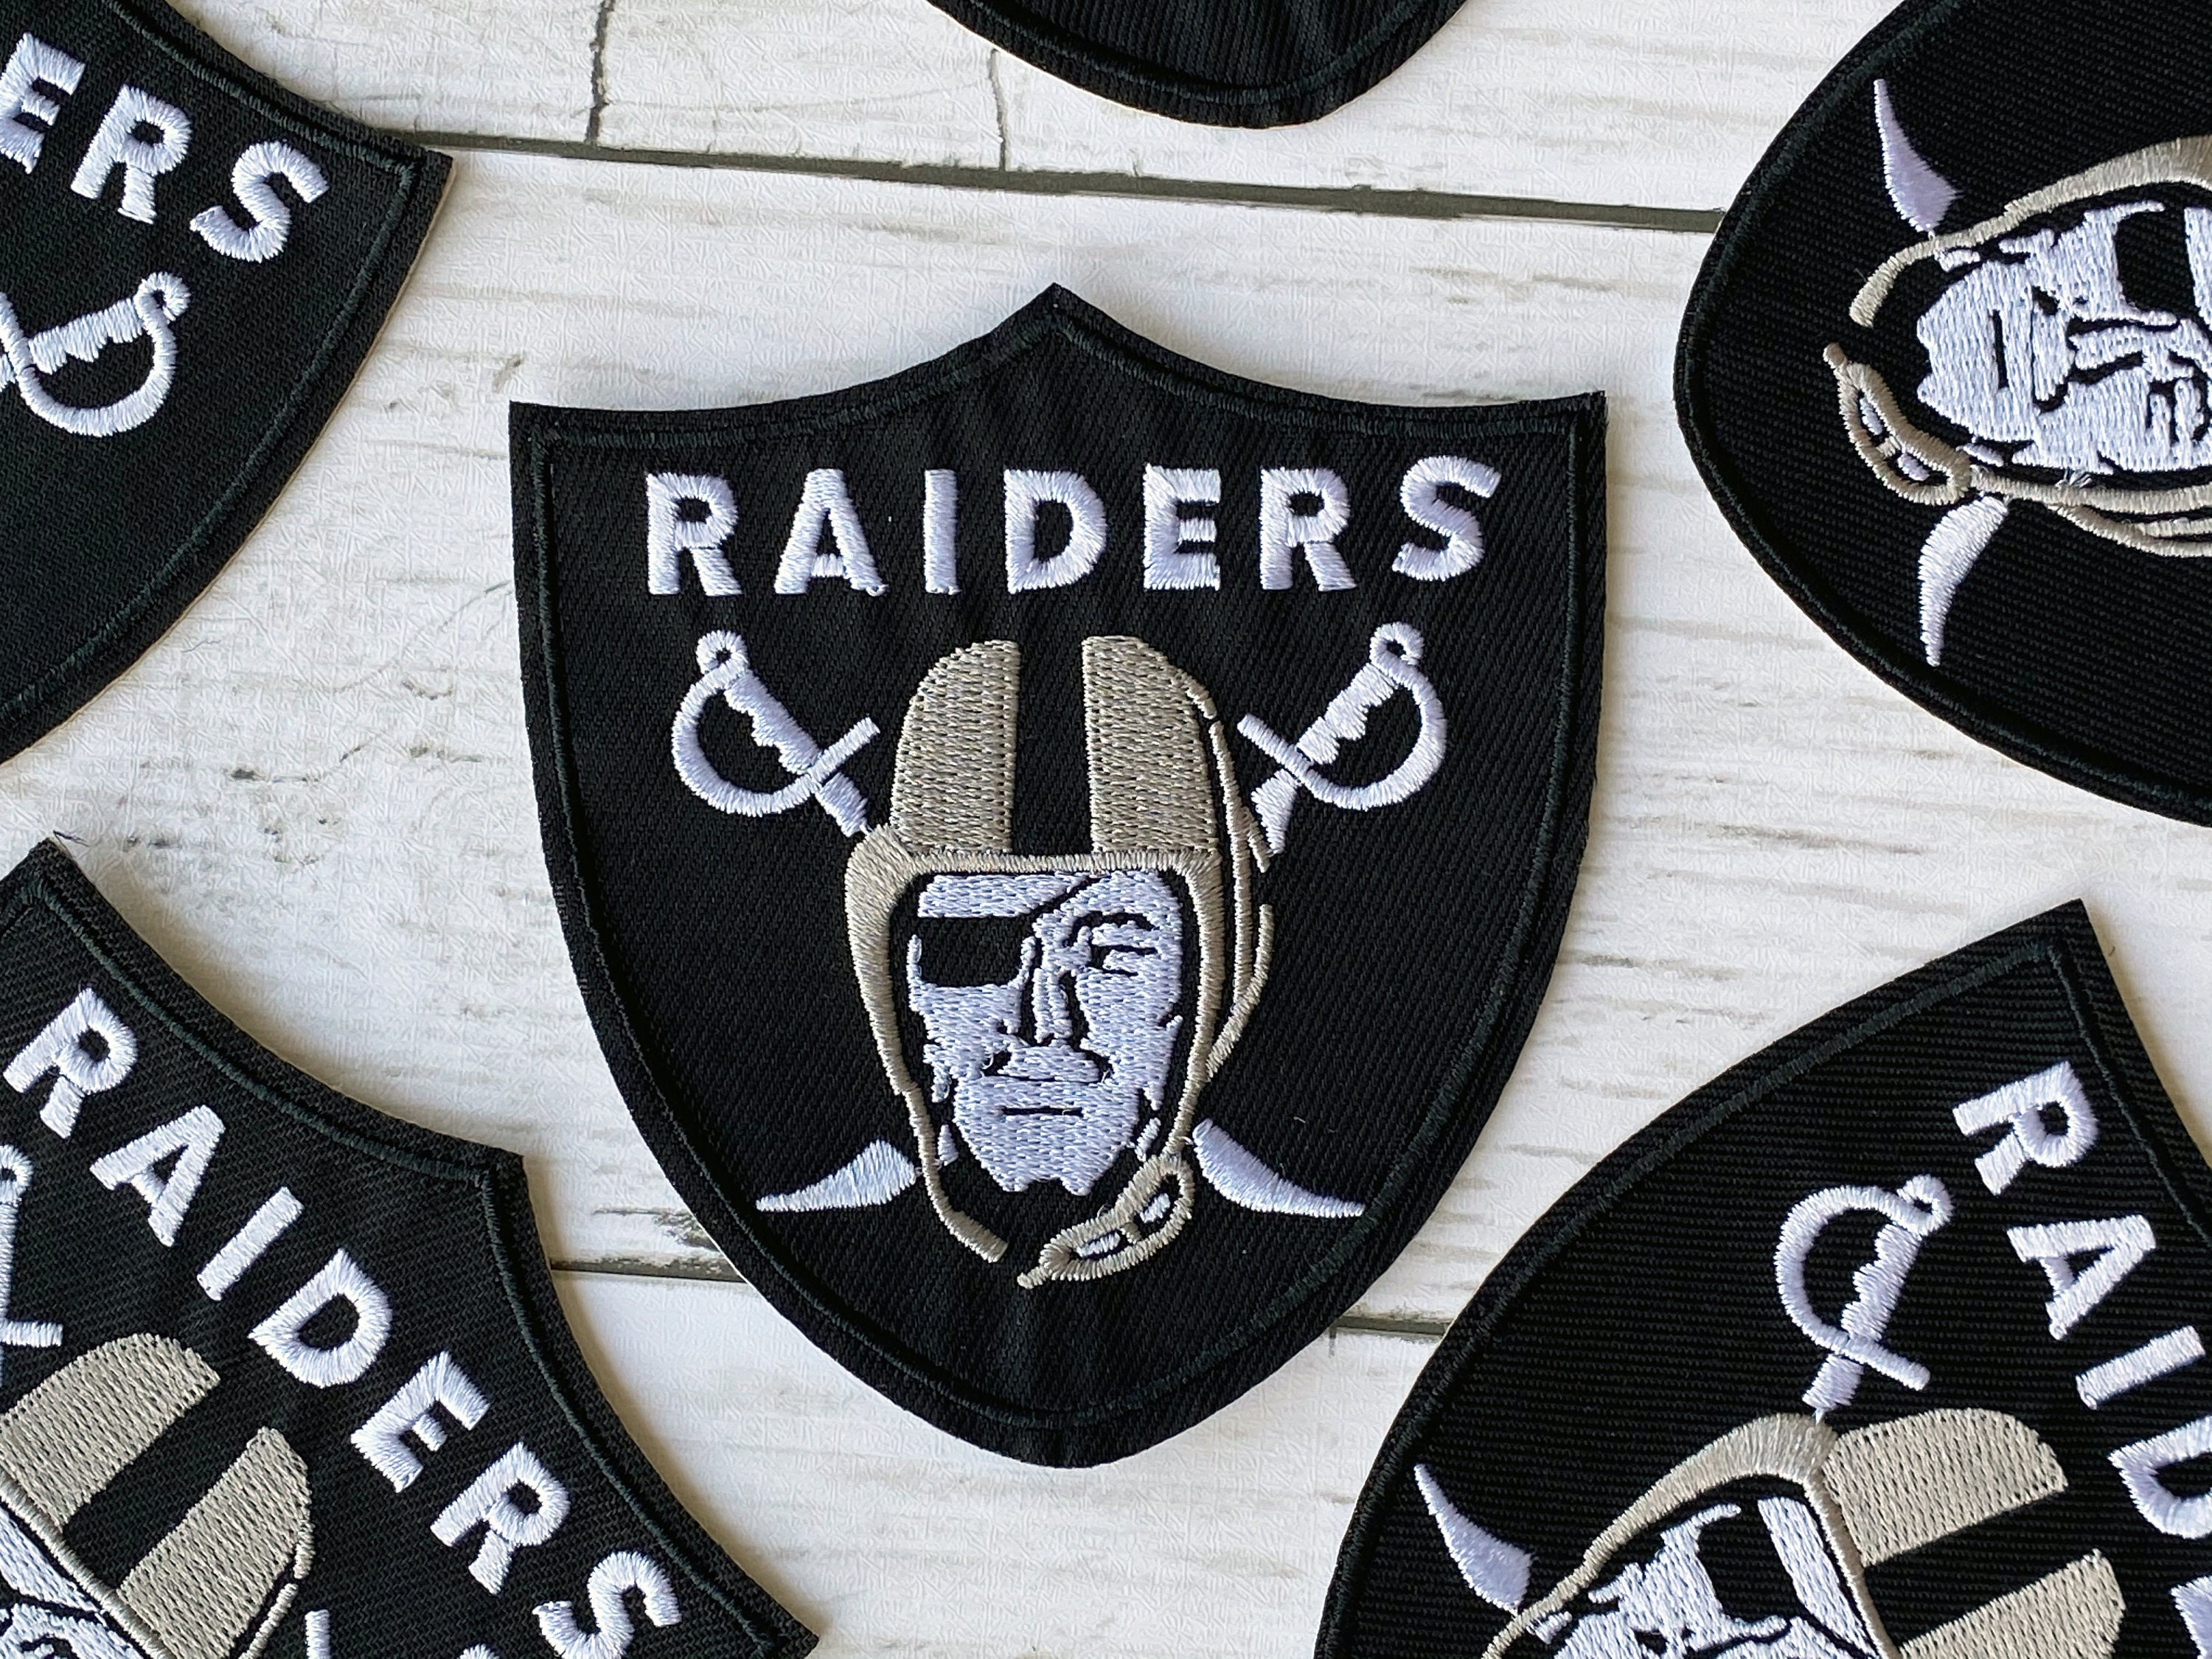 (1) NFL OAKLAND RAIDERS LOGO PATCH IRON-ON ITEM 4 inch